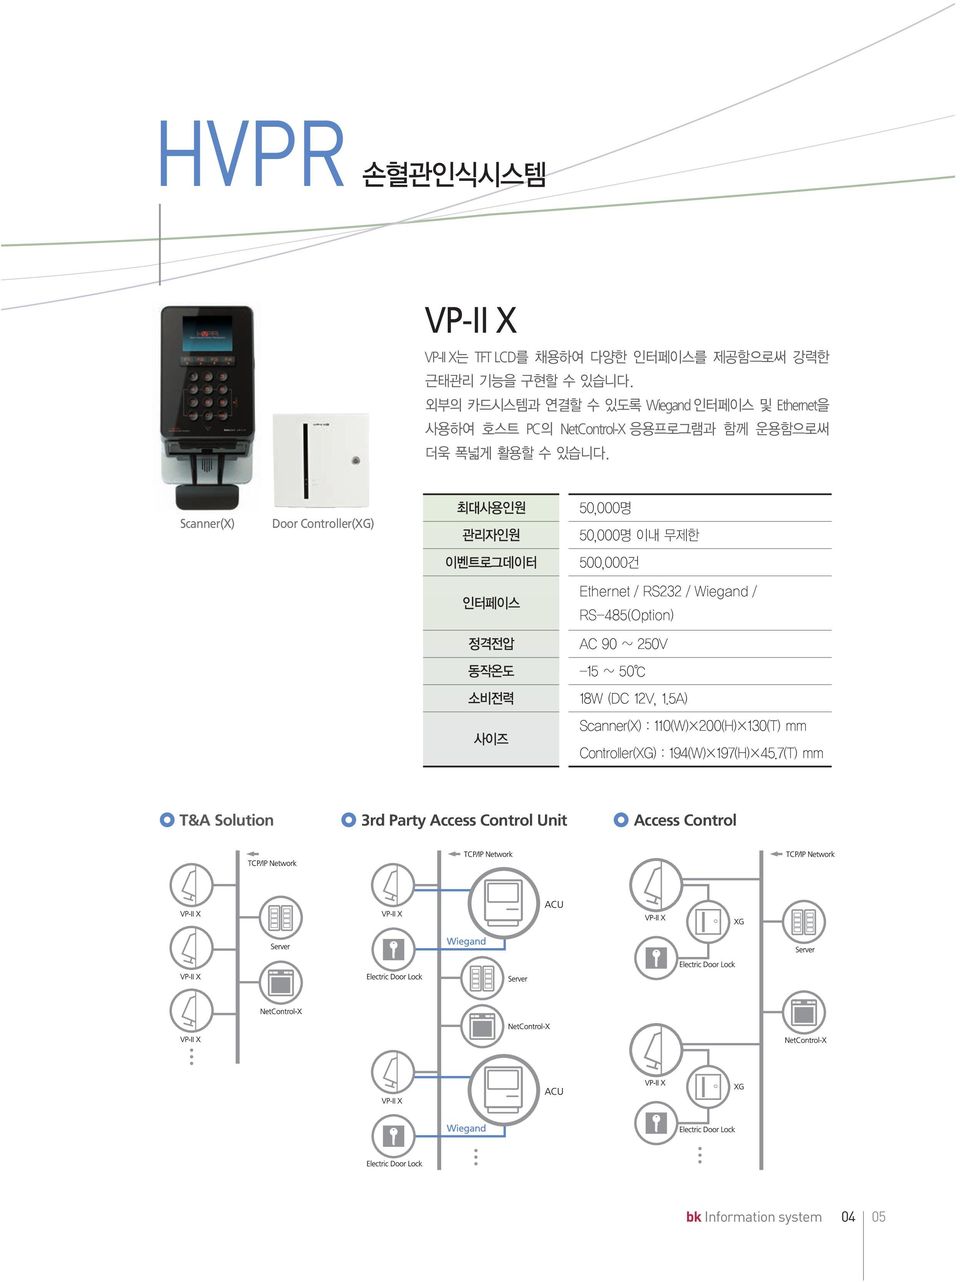 Controller(XG) T&A Solution 3rd Party Access